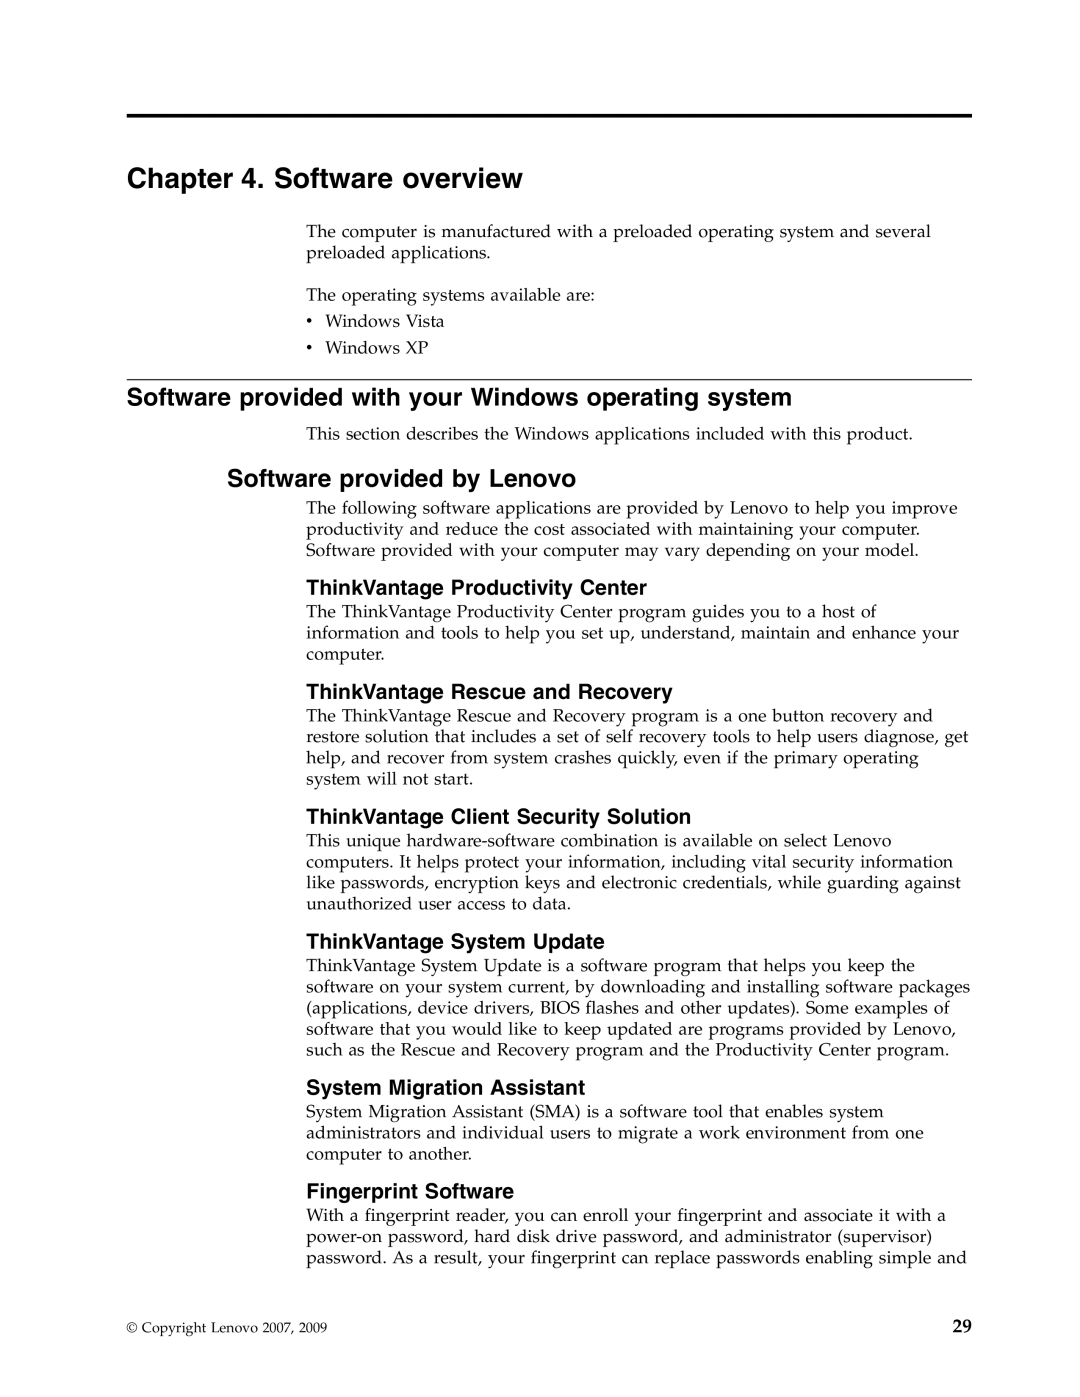 Lenovo 6019 Software overview, Software provided by Lenovo, ThinkVantage Productivity Center, ThinkVantage System Update 